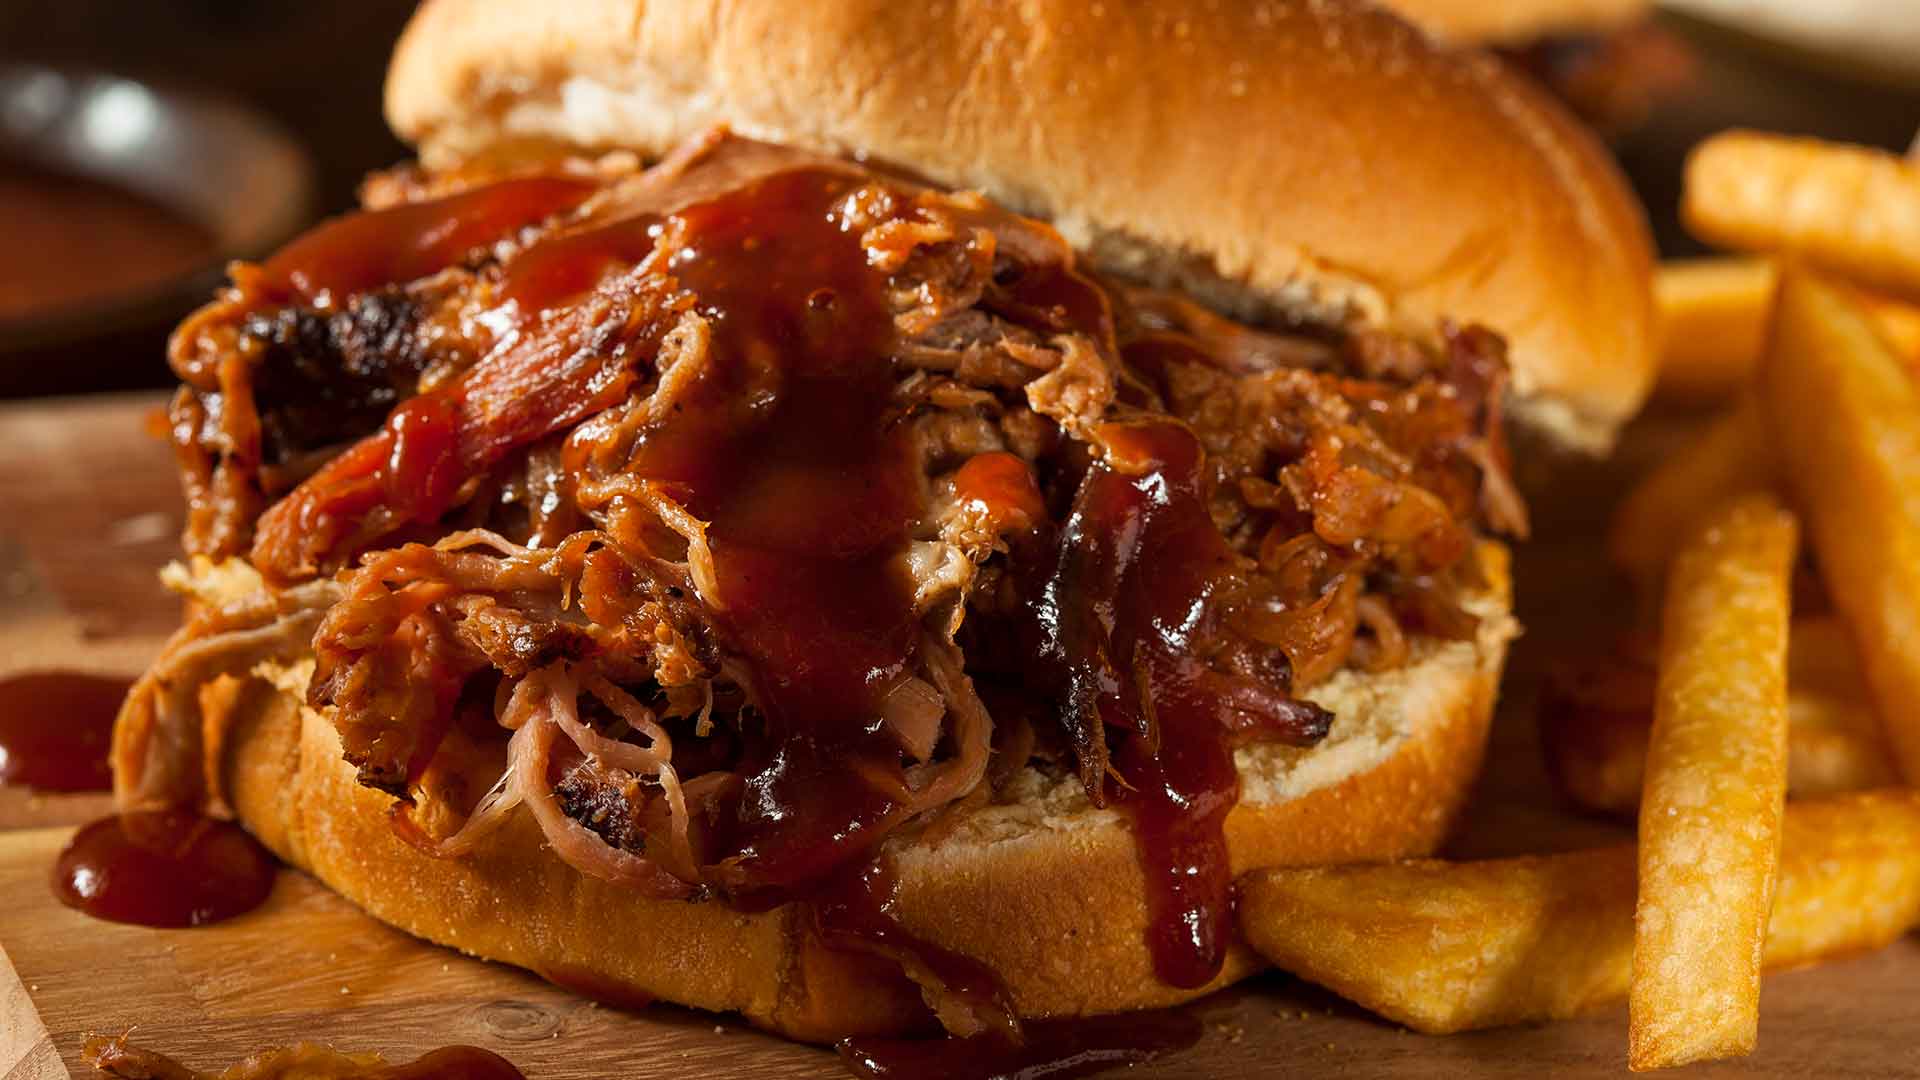 Pulled Pork sandwich with barbeque sauce.